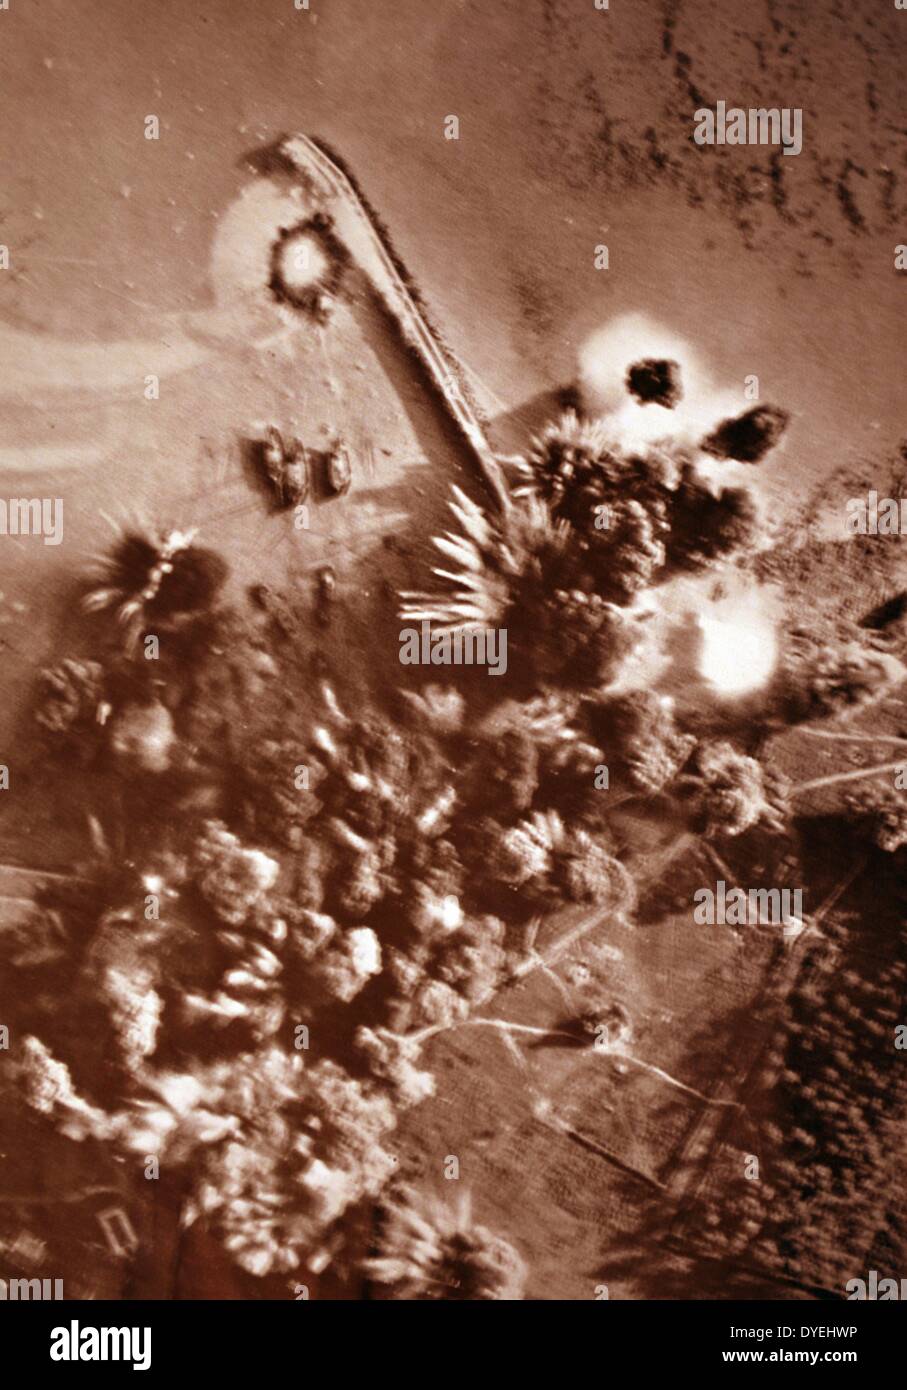 Bombing Brest, France - U.S. Army Forces. Small craft, gun emplacements and a quay on the Brest Peninsula took a pounding from England-based U.S. Army 8th Air Force bombers several weeks after D-Day, 1944. The camera caught the bombs in various stages of exploding and at the same time recorded the success of the mission. Underwater defences can be seen at the lower right. Stock Photo